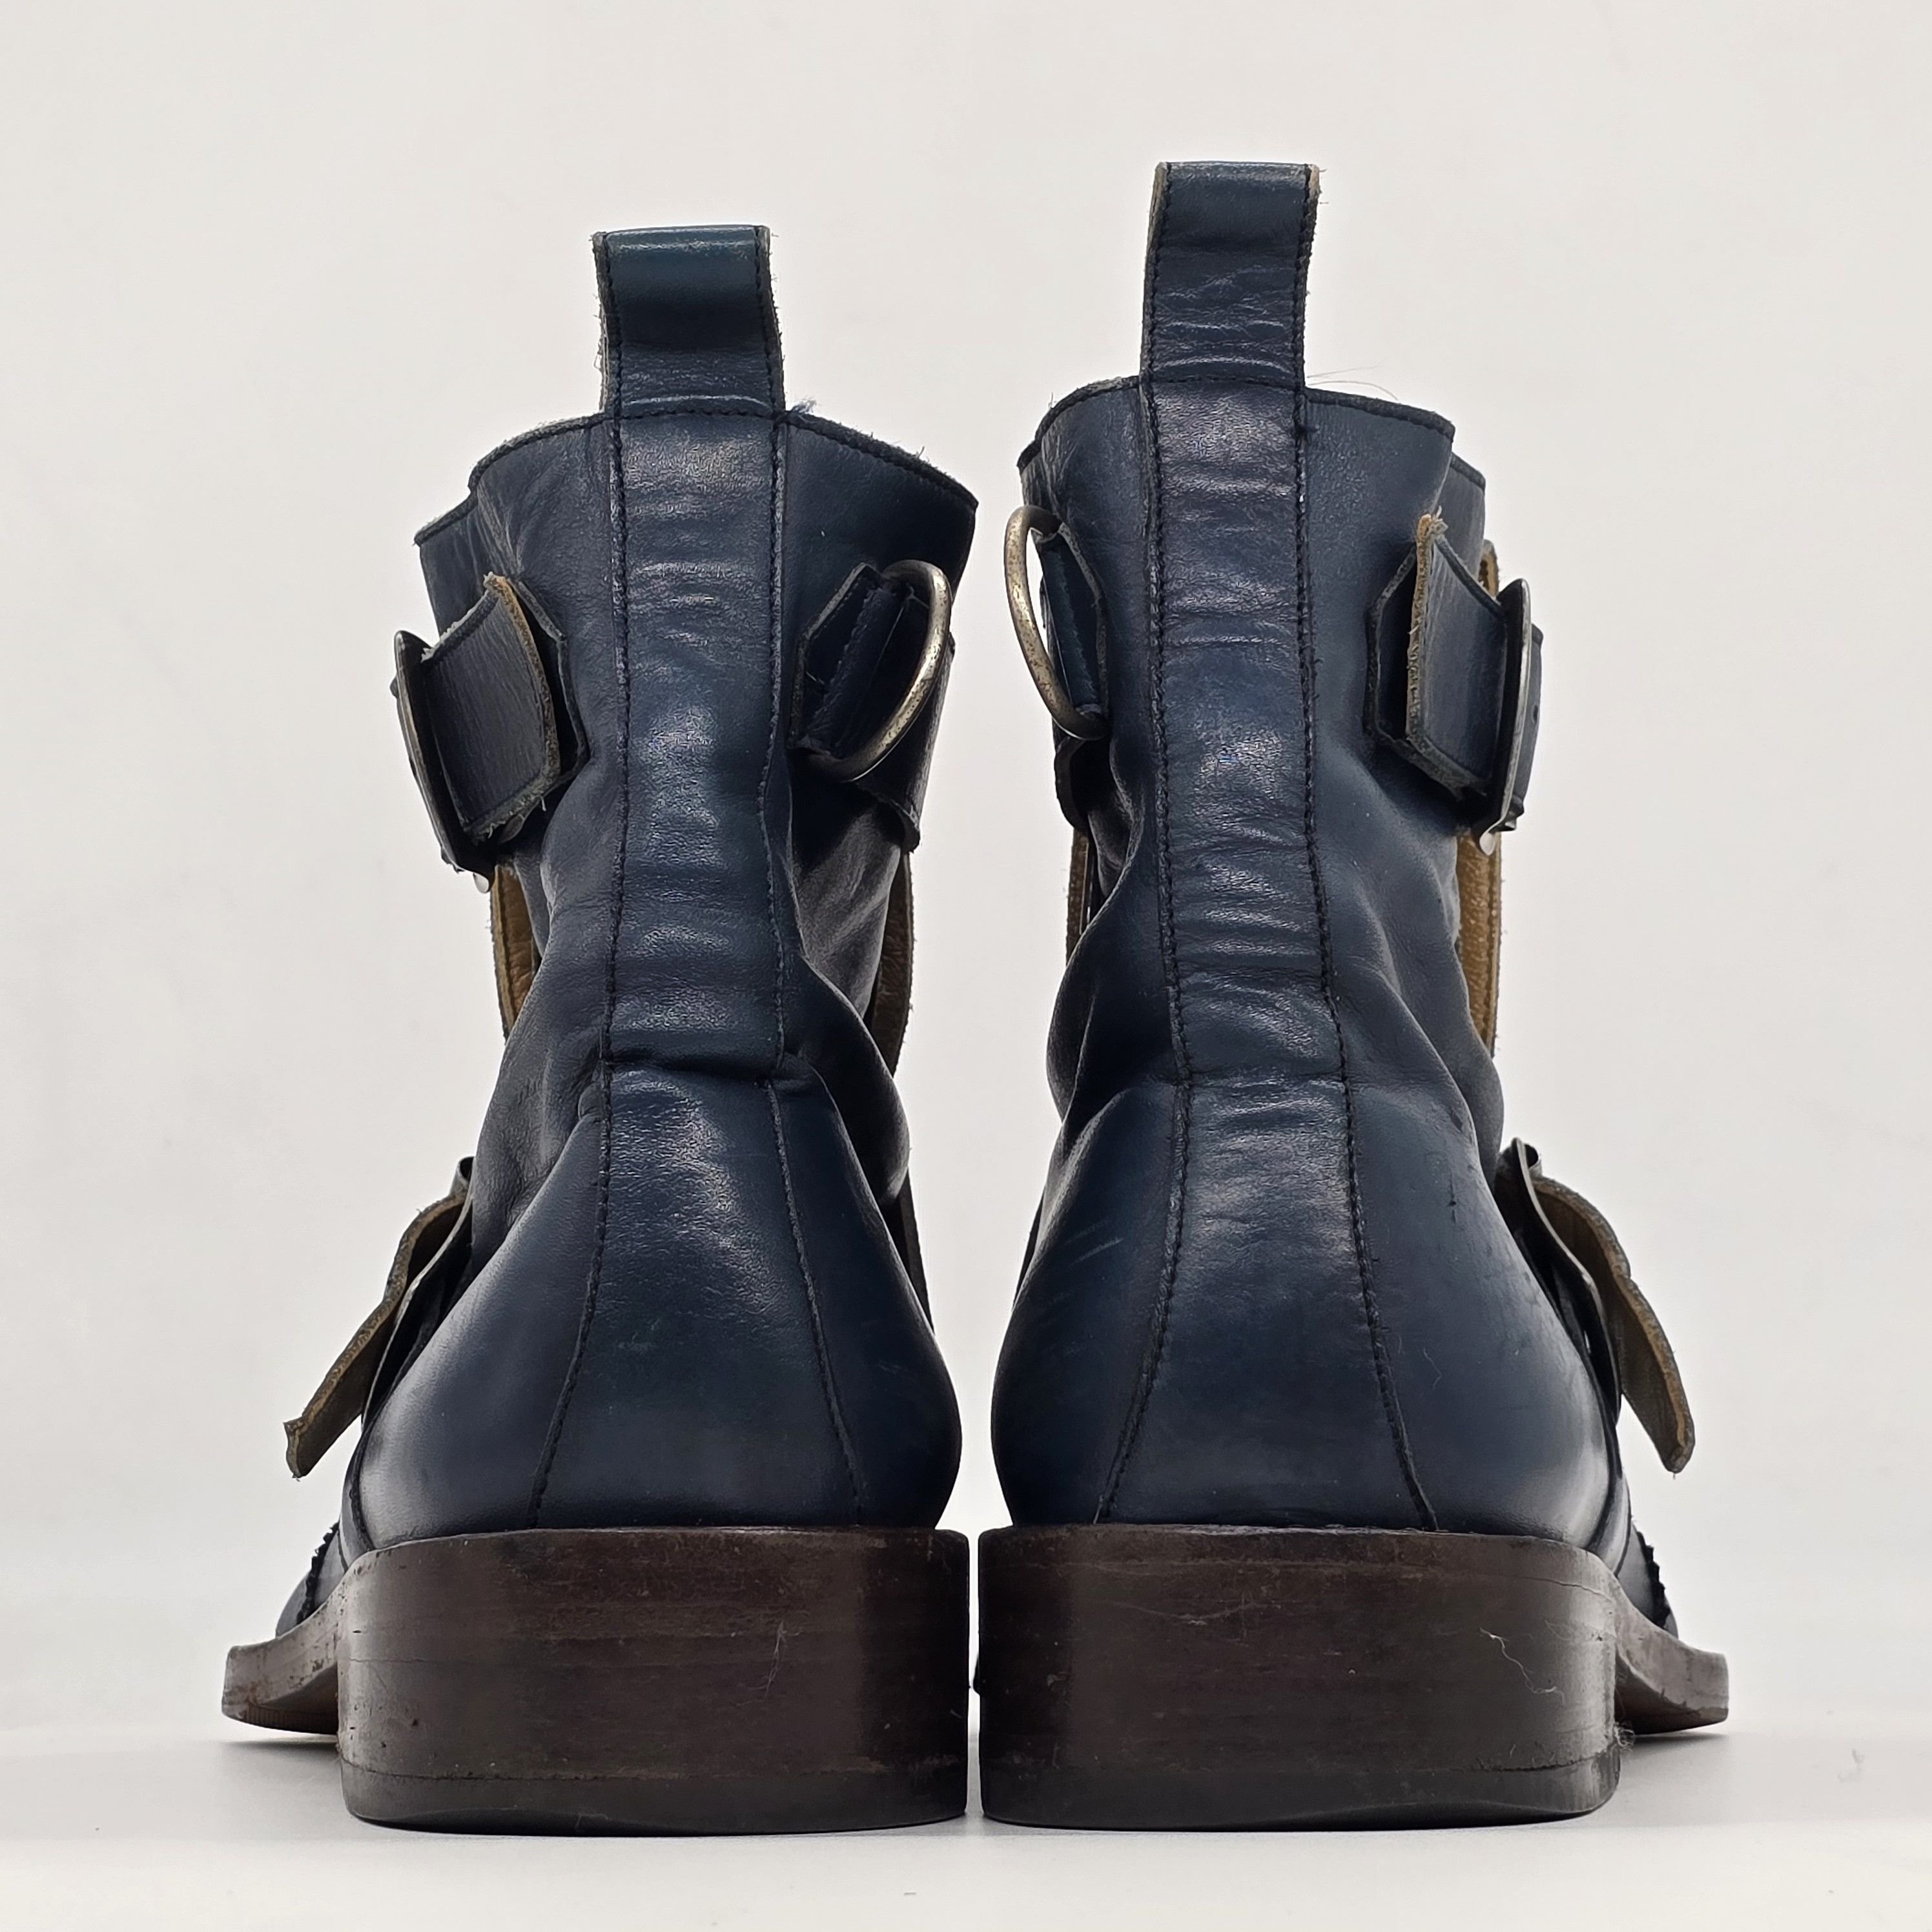 Vivienne Westwood - Archival Seditionaries Buckled Boots - 7